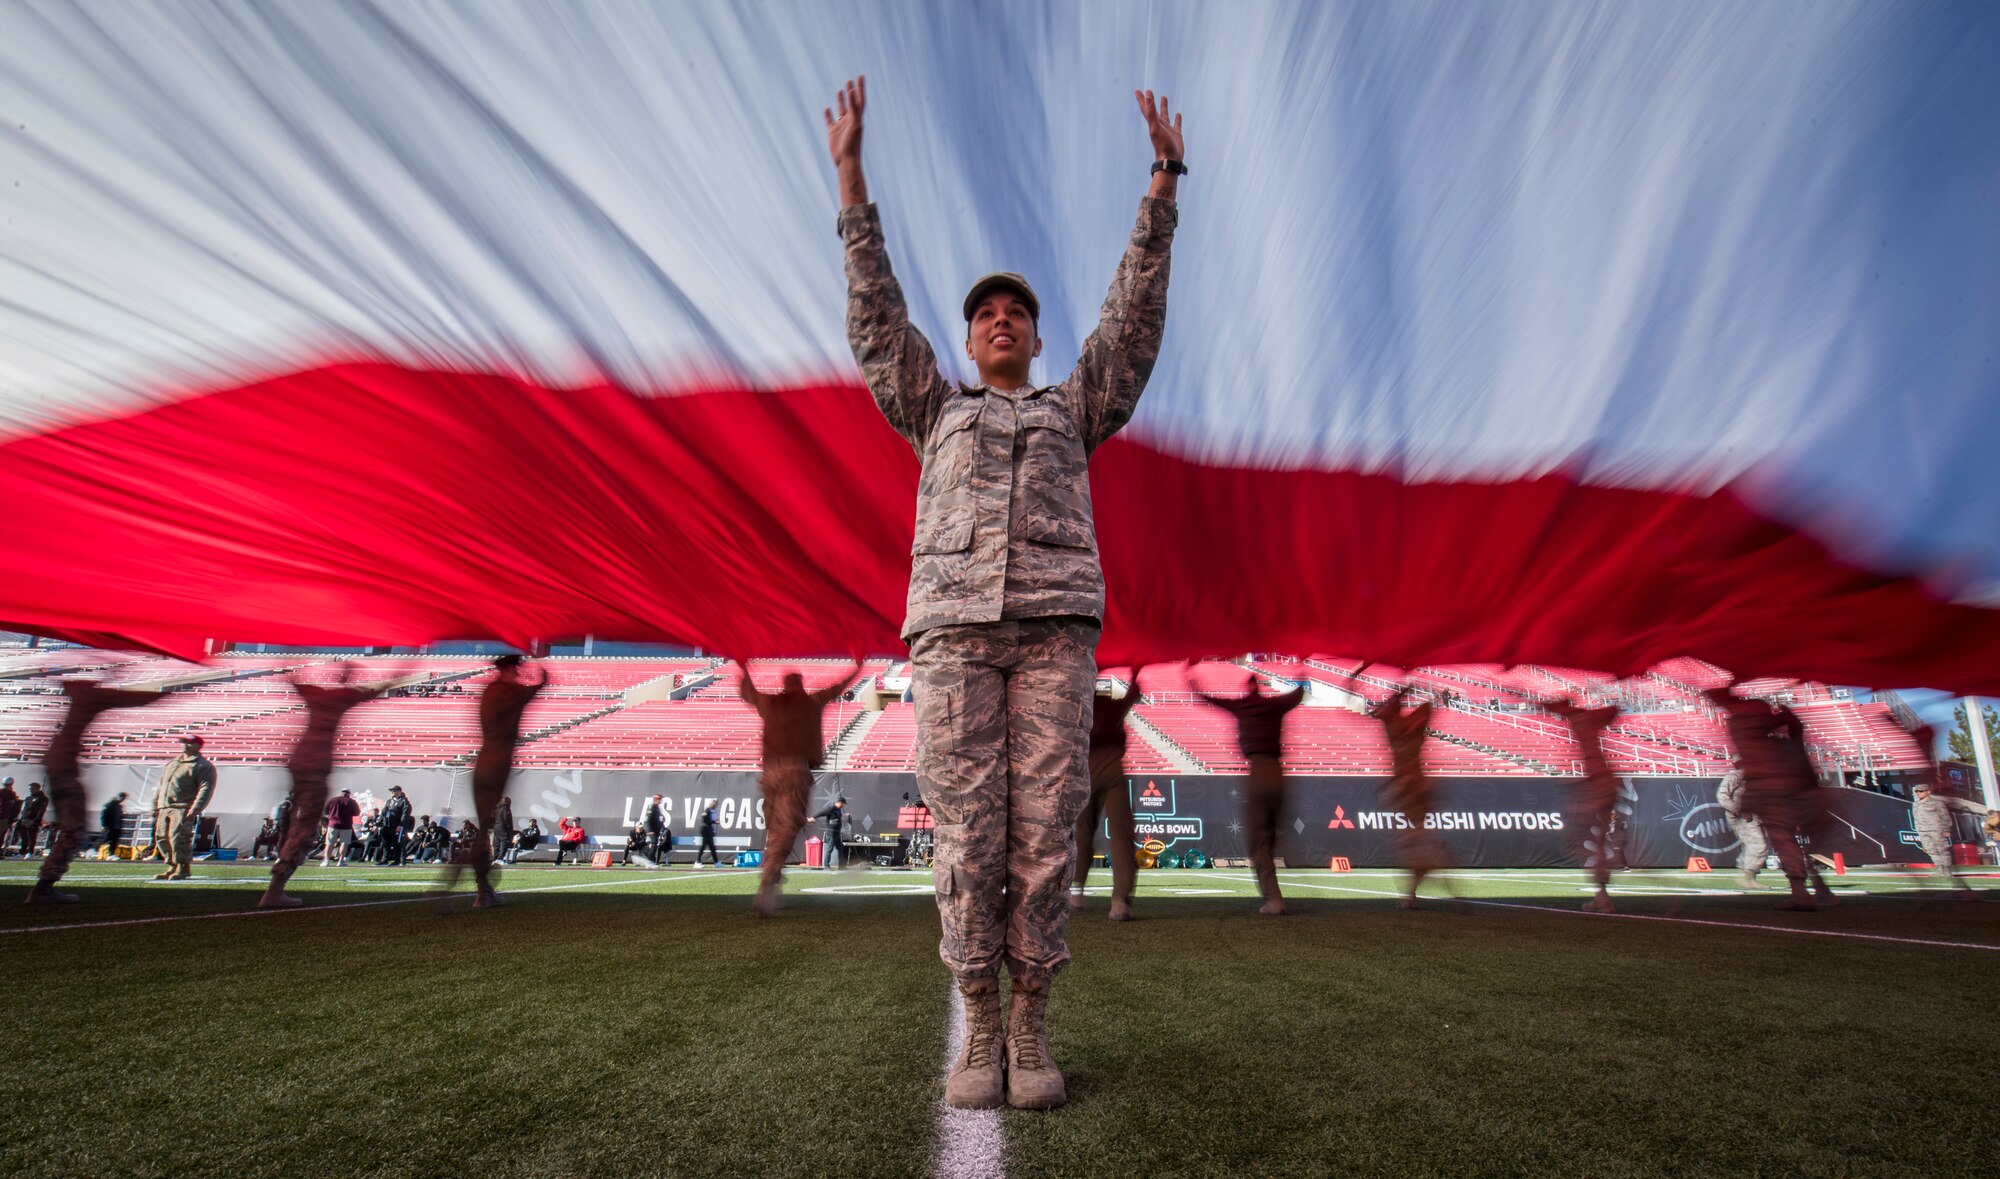 Airman 1st Class Ashley Libby, an aerospace medical technician assigned to the 99th Medical Operations Squadron at Nellis Air Force Base, Nevada, raises her arms to keep the American flag off the ground during the 2018 Las Vegas Bowl opening ceremony at Sam Boyd Stadium in Las Vegas, Dec. 15, 2018. The half-ton flag required more than 200 Airmen to carry it. (U.S. Air Force photo by Senior Airman Andrew D. Sarver)